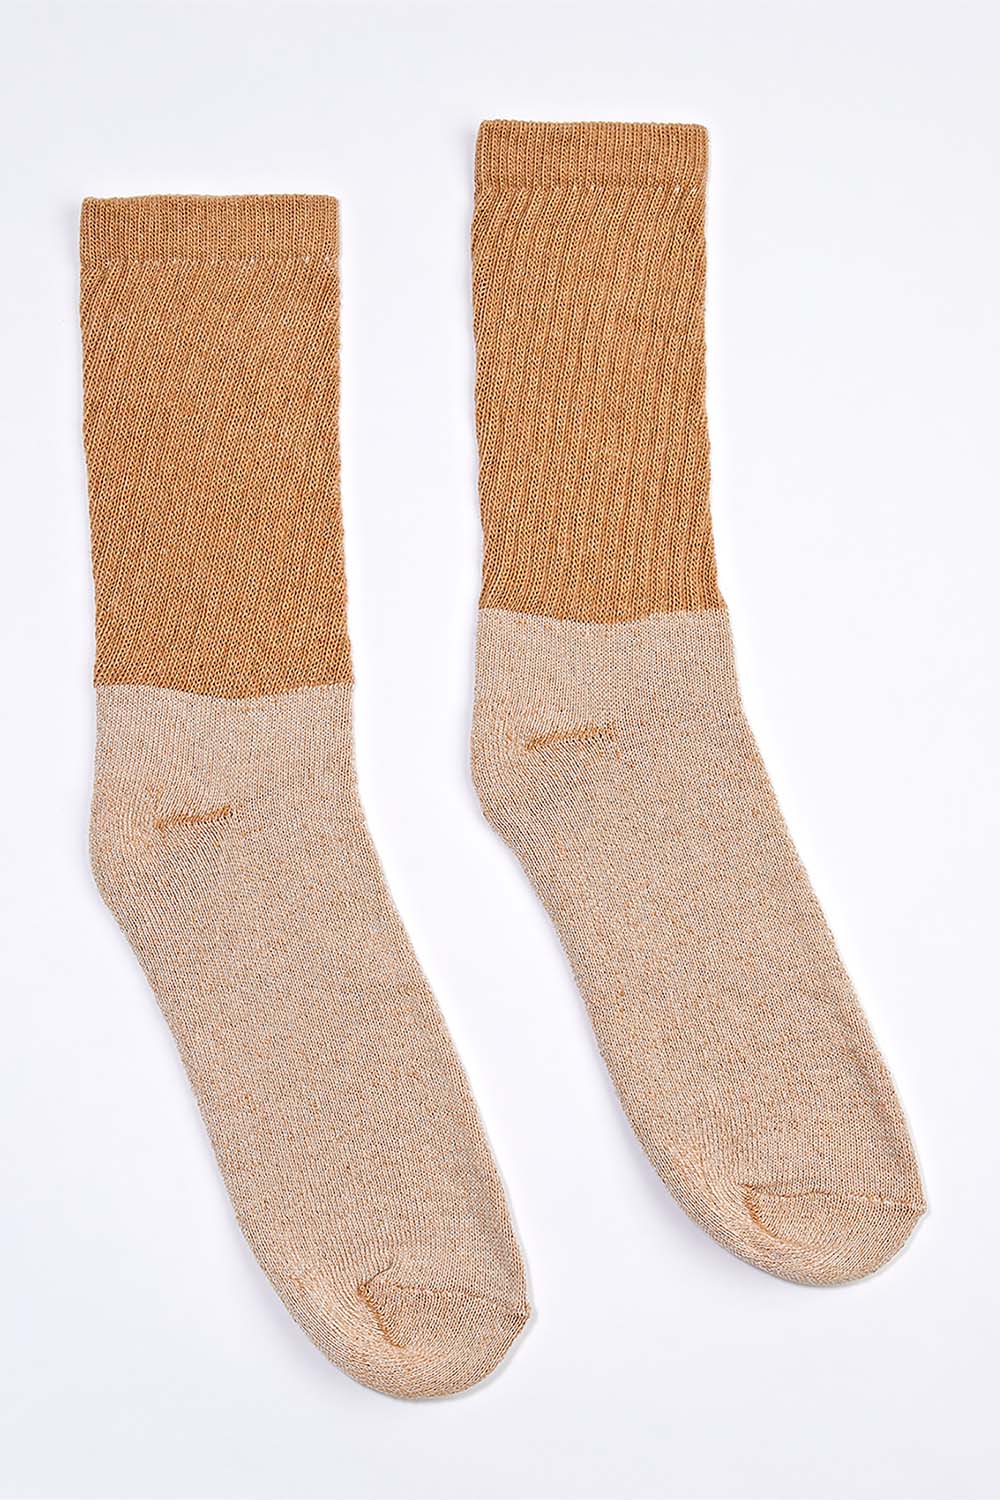 OCC Brown Ankle Socks Organic Cotton Dye and Chemical-free